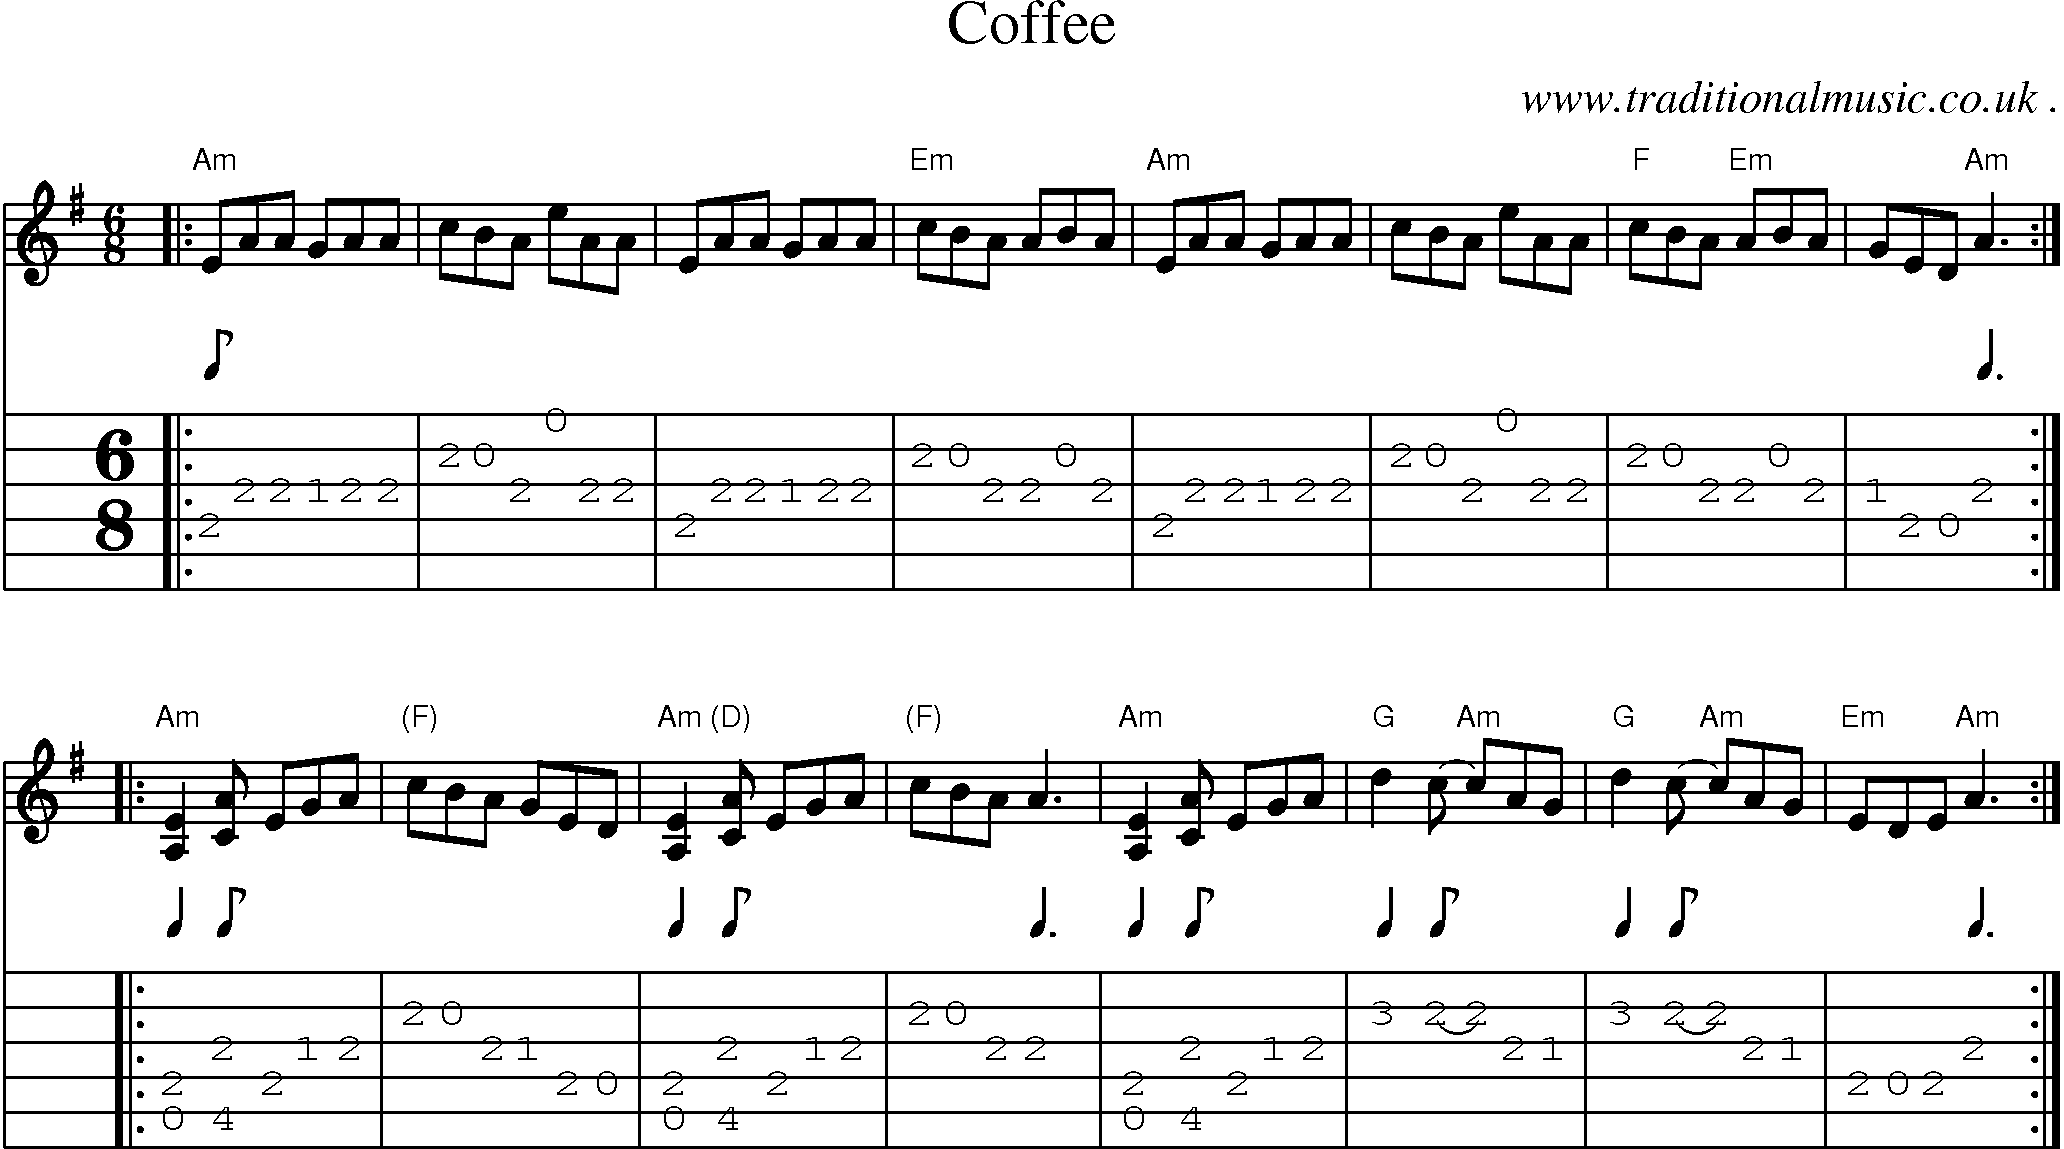 Sheet-music  score, Chords and Guitar Tabs for Coffee